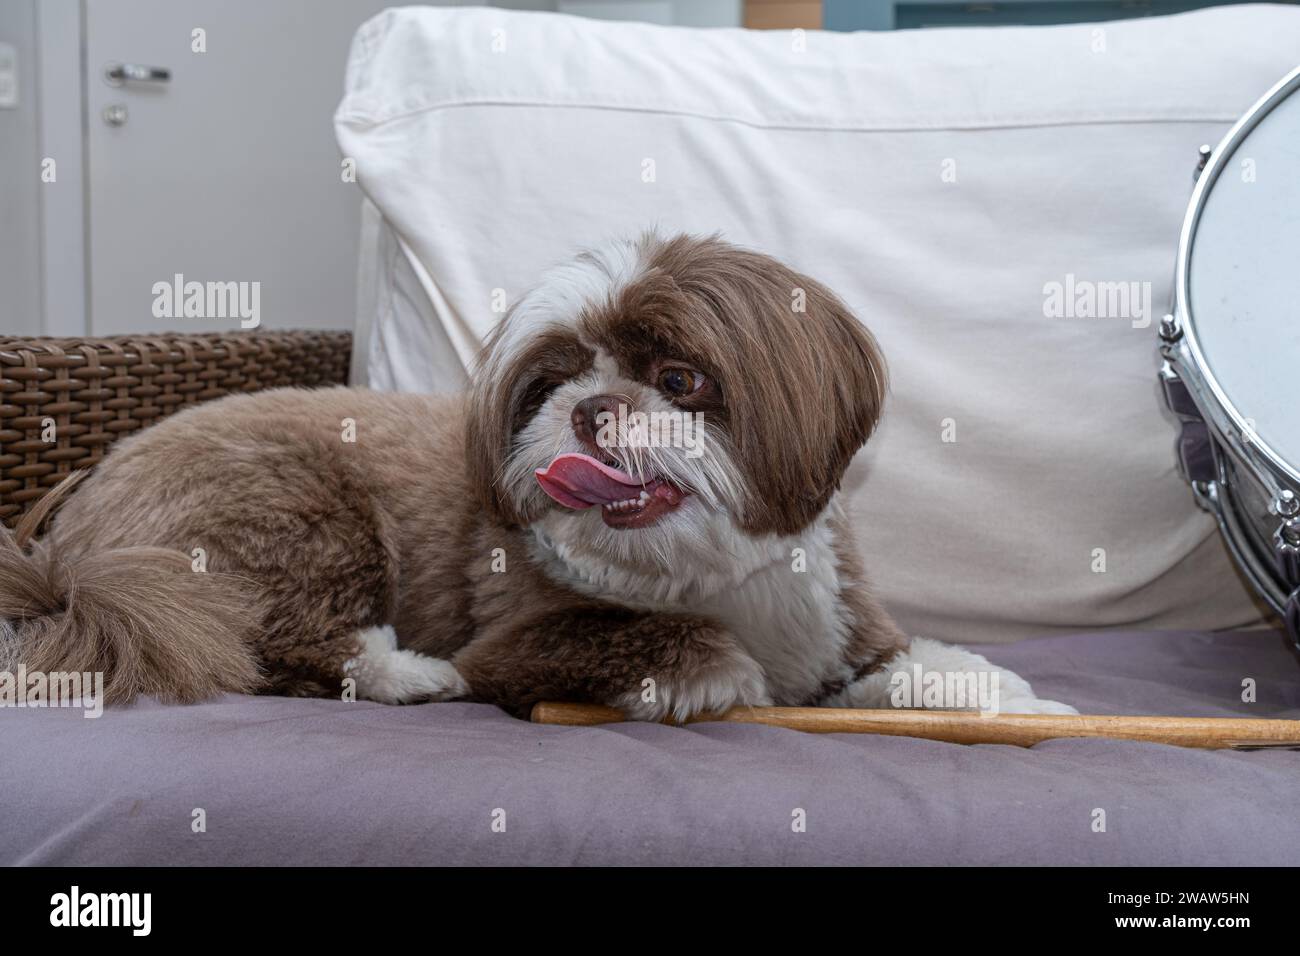 2 year old shih tzu with a tongue outside a drumstick and a metal snare 1. Stock Photo